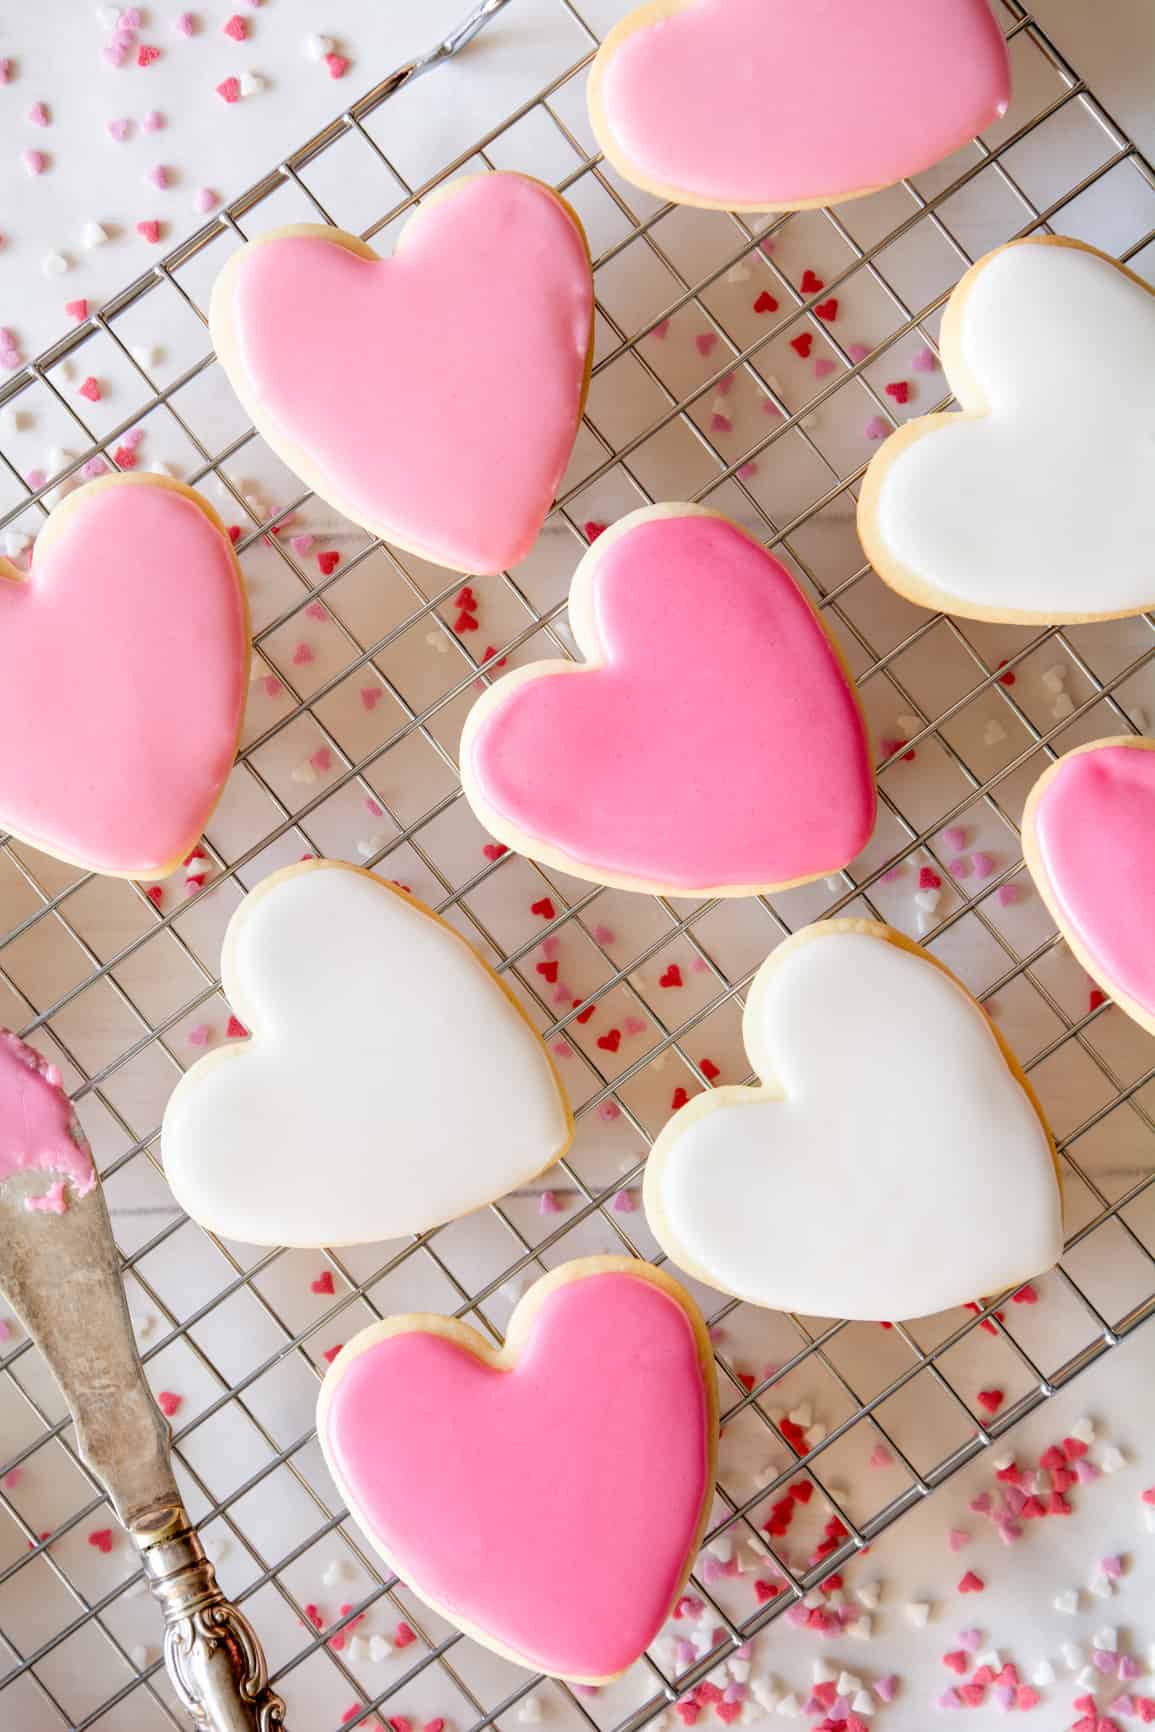 Looking for Valentine’s Day cookie recipe ideas? These Heart-Shaped Sugar Cookies with white and pink pastel royal icing are so simple and delicious. Kids would love to get in on the baking action too and hand out to their school classmates (or crush?). Click pin for this easy step-by-step recipe.